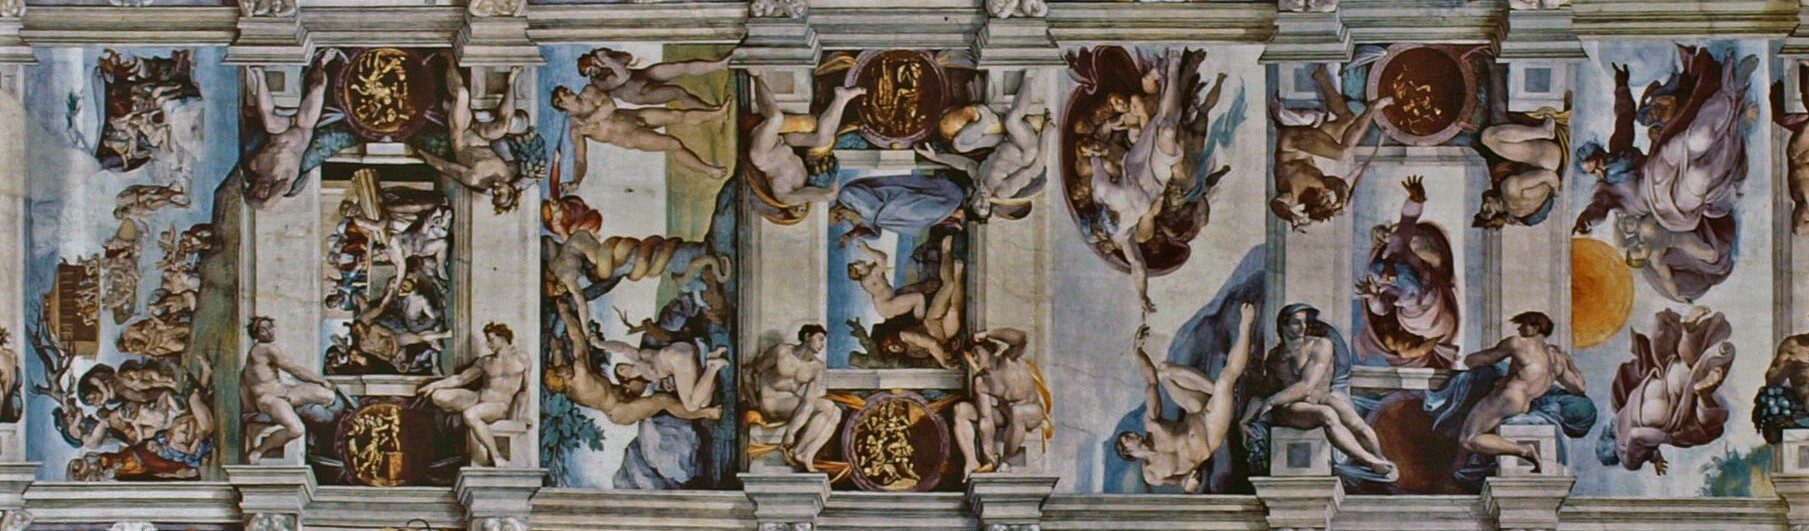 Sistine Chapel ceiling by Michaelangelo. Crop and darkening of photo by Amandajm on Wikimedia (https://commons.wikimedia.org/wiki/File:CAPPELLA_SISTINA_Ceiling.jpg). CC BY 3.0 (https://creativecommons.org/licenses/by-sa/3.0/deed.en).